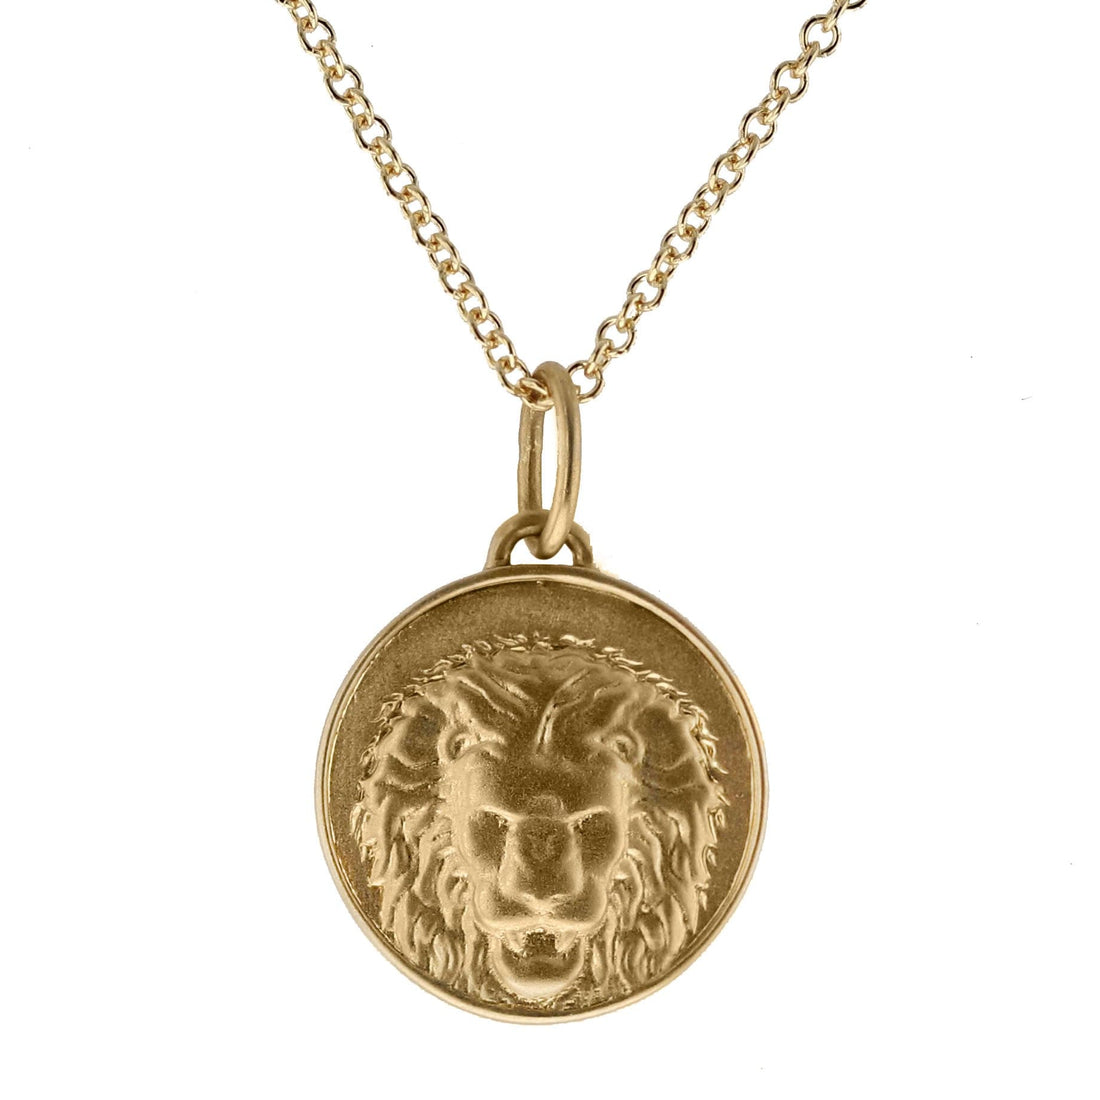 The Lion & The Mouse Small Aesop Medallion - Skeie's Jewelers